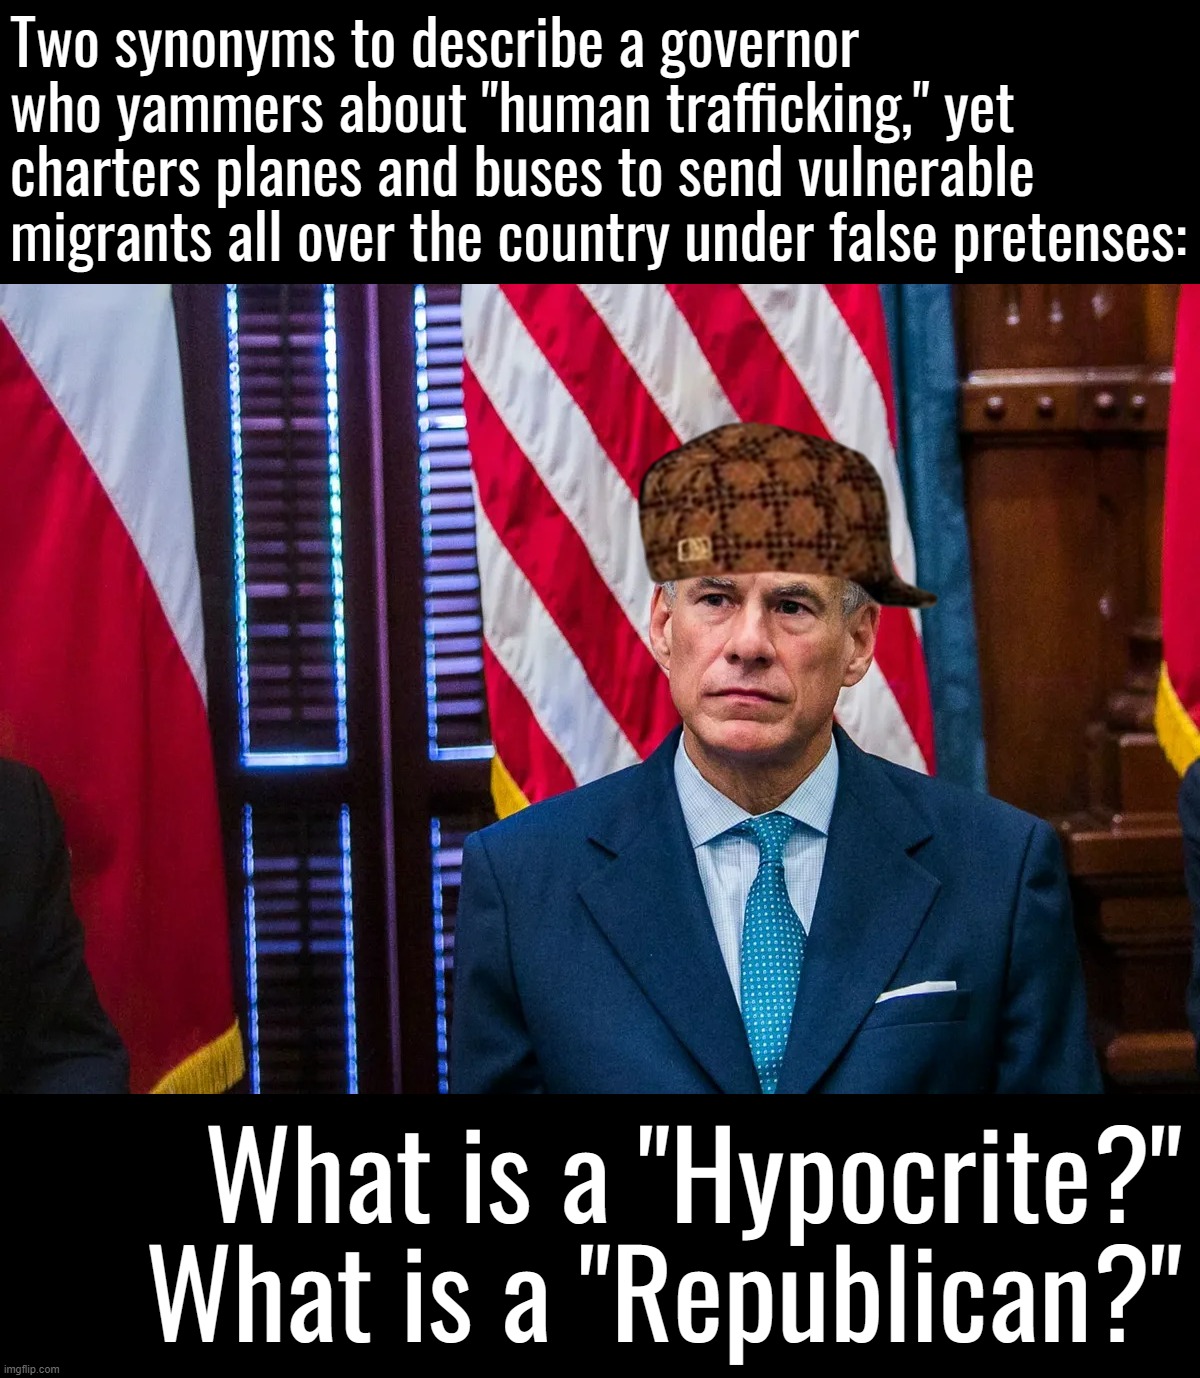 Texas Governor Greg Abbott | Two synonyms to describe a governor who yammers about "human trafficking," yet charters planes and buses to send vulnerable migrants all over the country under false pretenses:; What is a "Hypocrite?" What is a "Republican?" | image tagged in texas governor greg abbott | made w/ Imgflip meme maker